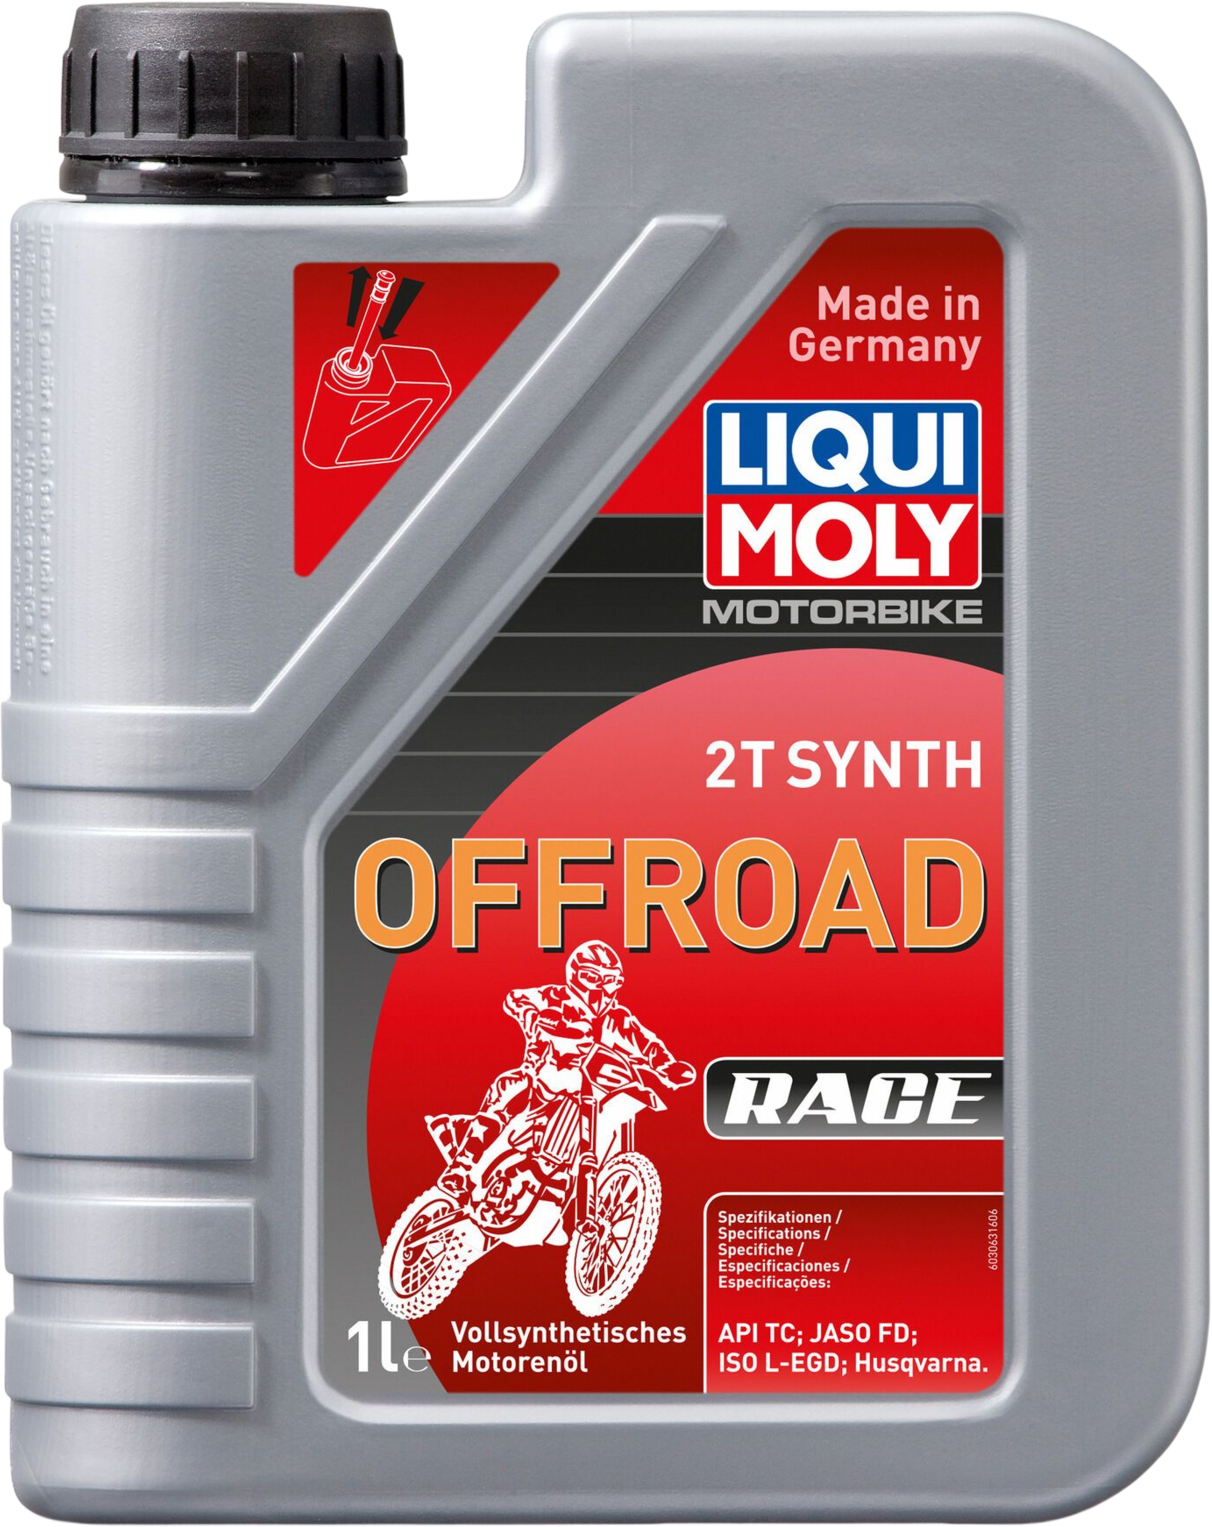 Liqui Moly Motorbike 2T Synth Offroad Race, 6 x 1 lt detail 2